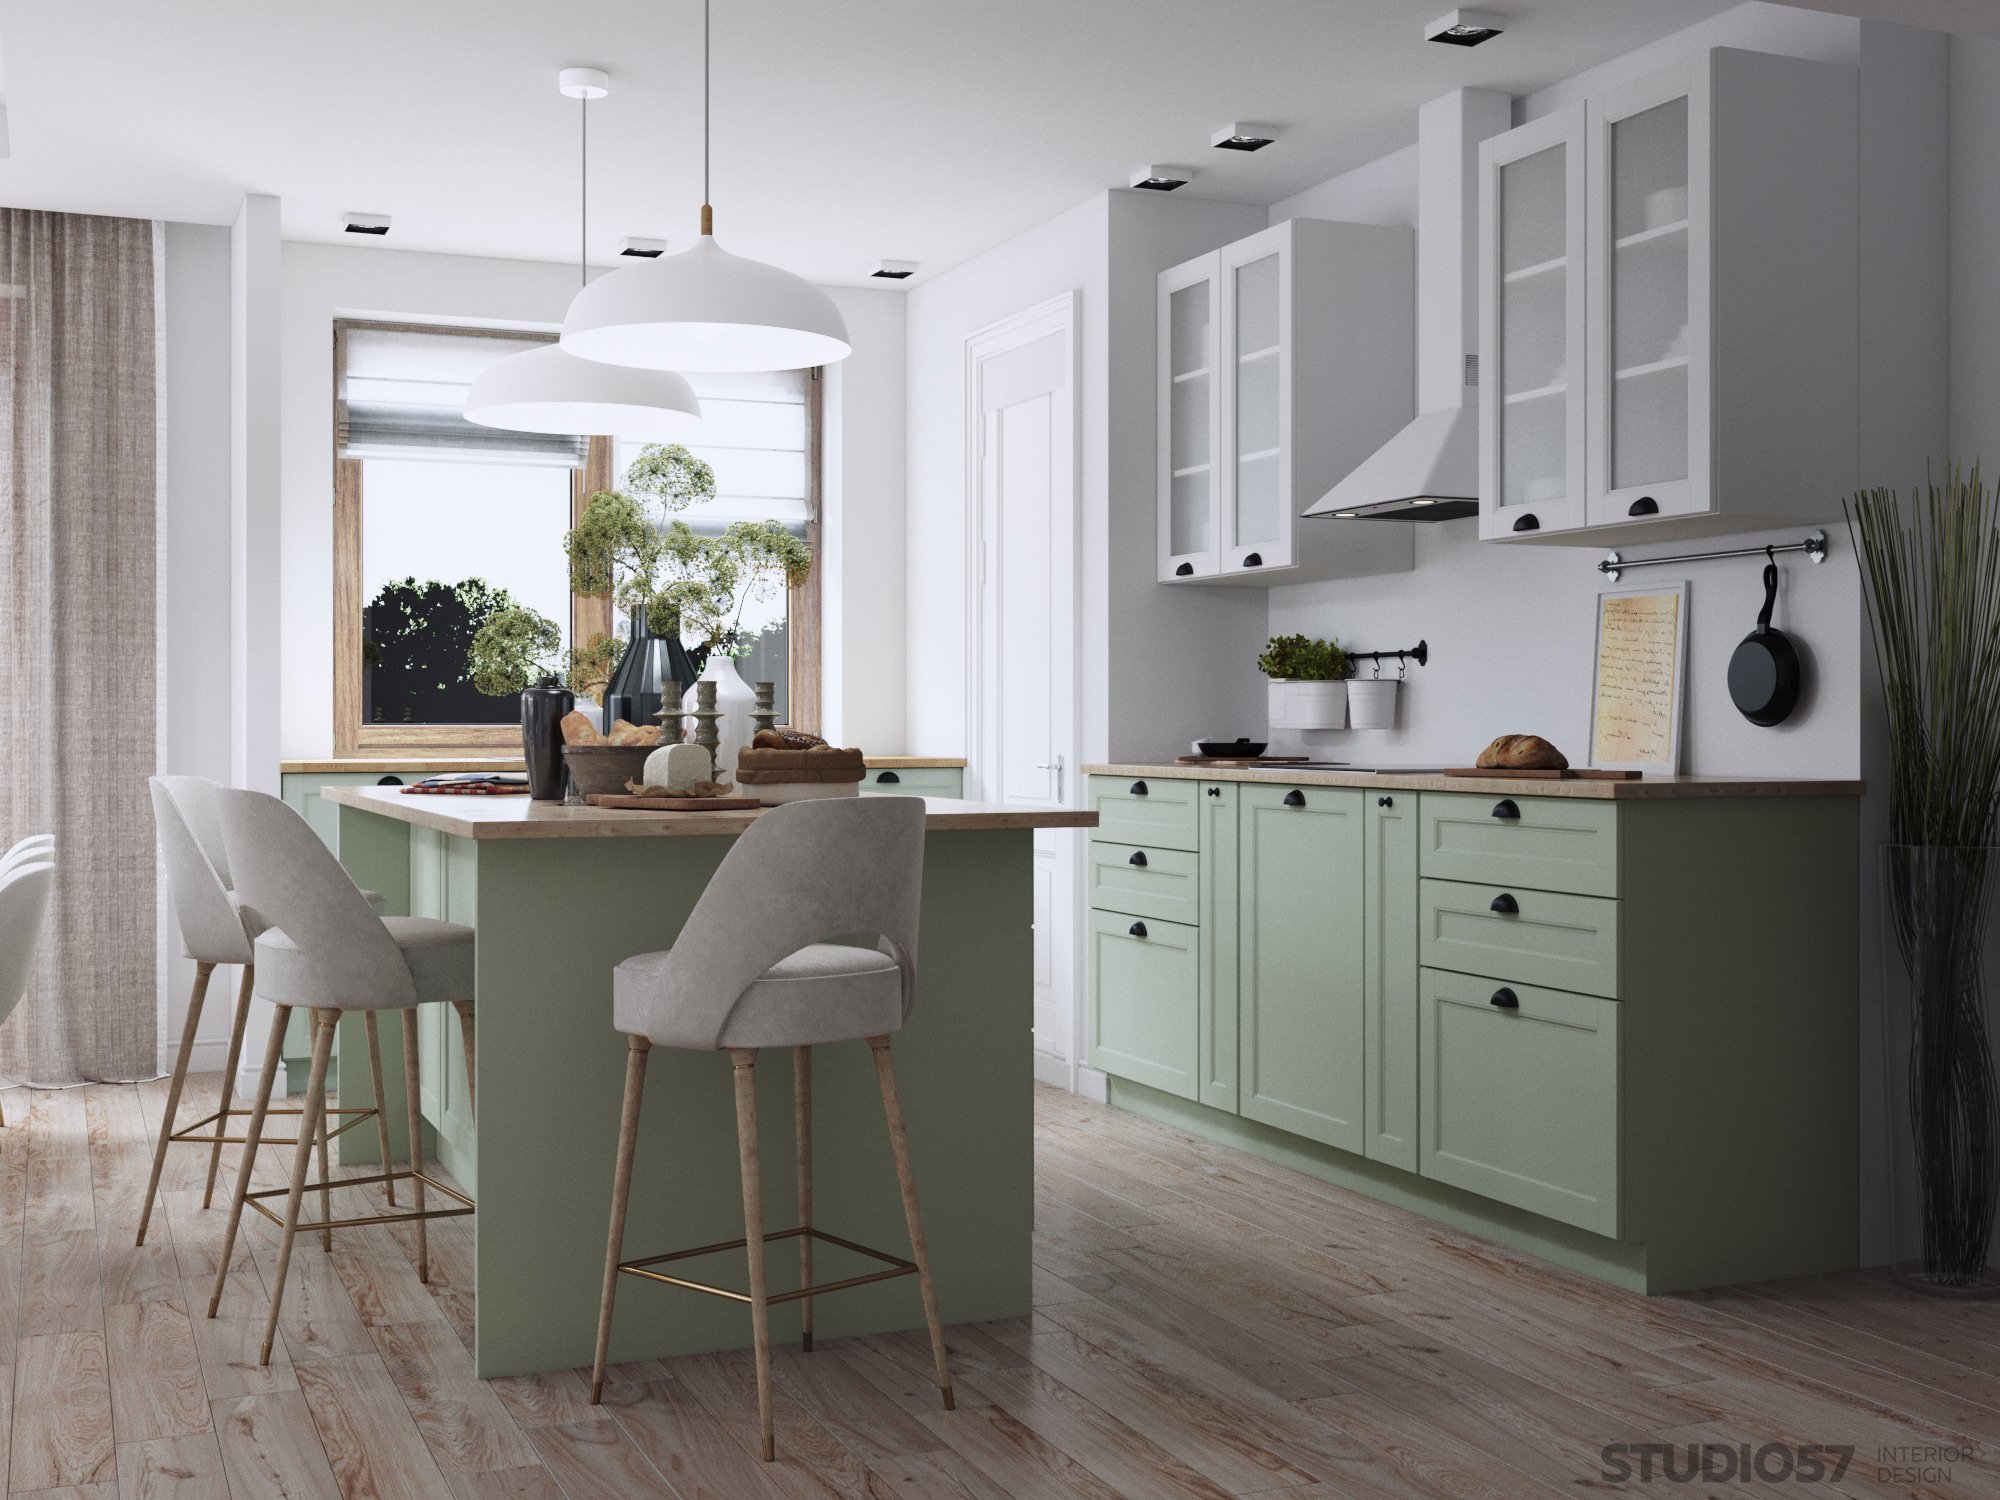 Kitchen in olive color photo